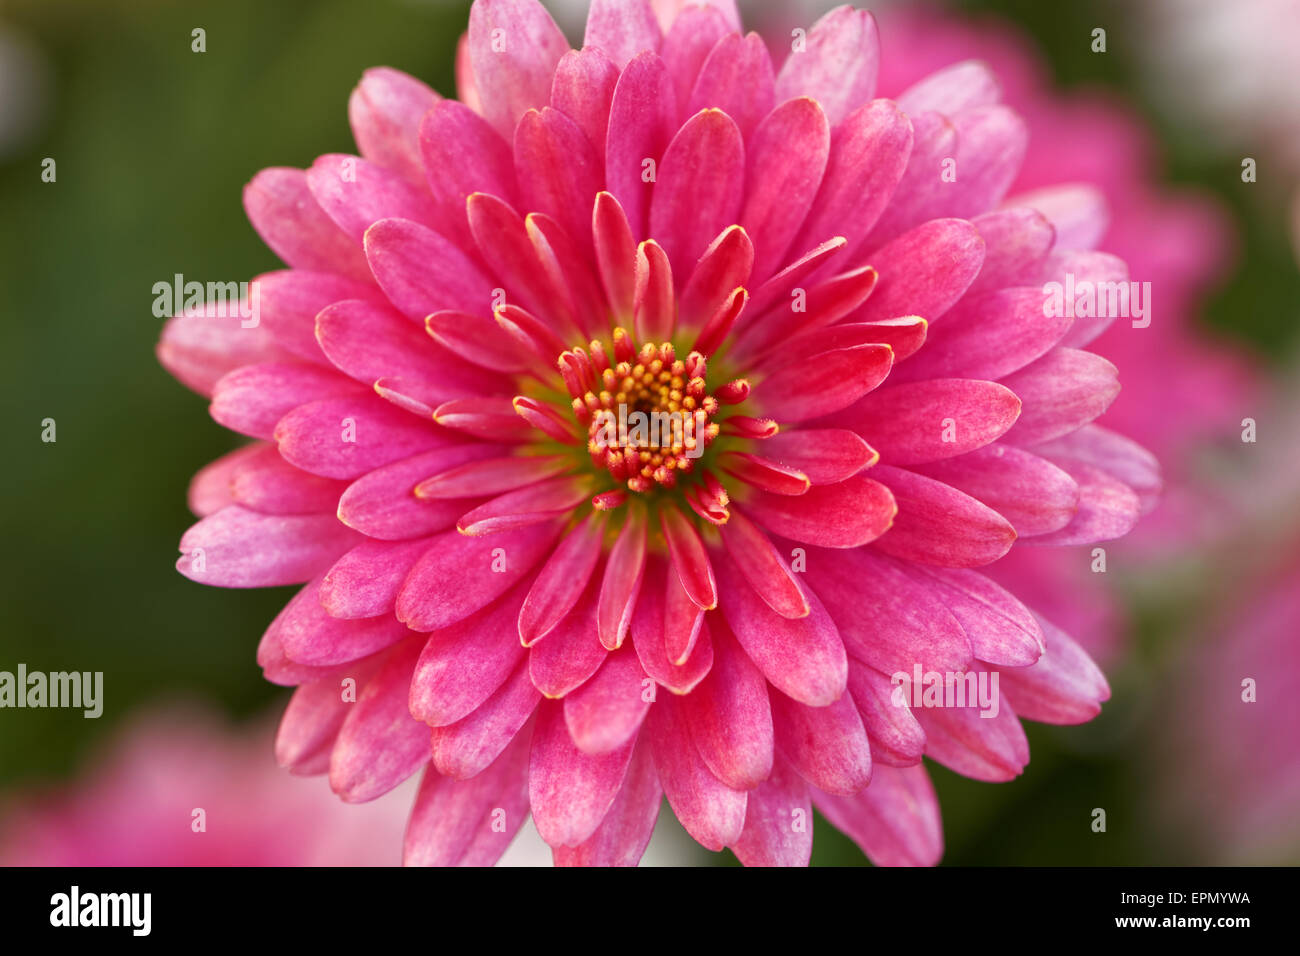 Beautiful red pink decorative dahlia flower from garden close up macro bloom Stock Photo